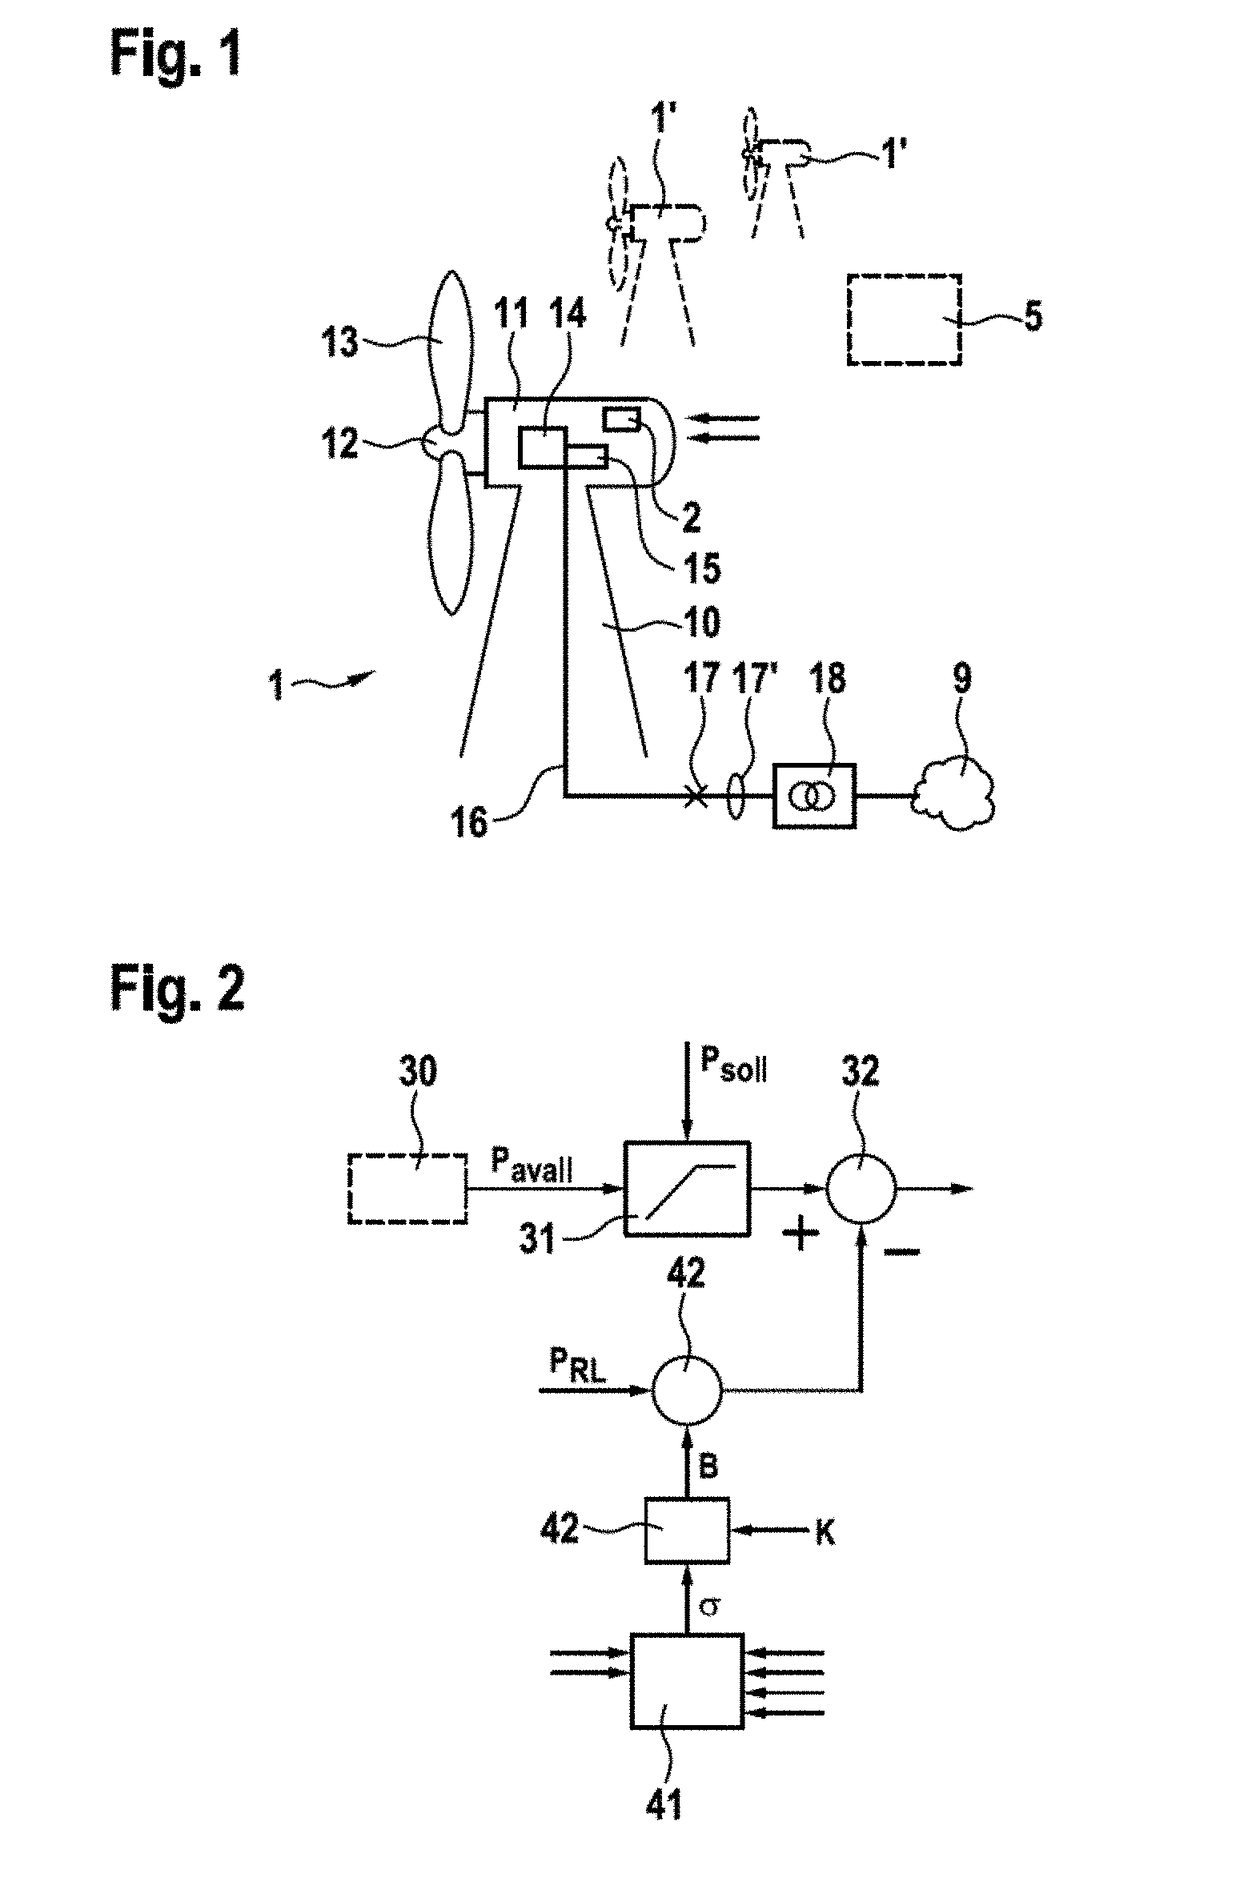 Provision of controlling capacity during the operation of a regenerative power generating unit, specifically a wind turbine installation